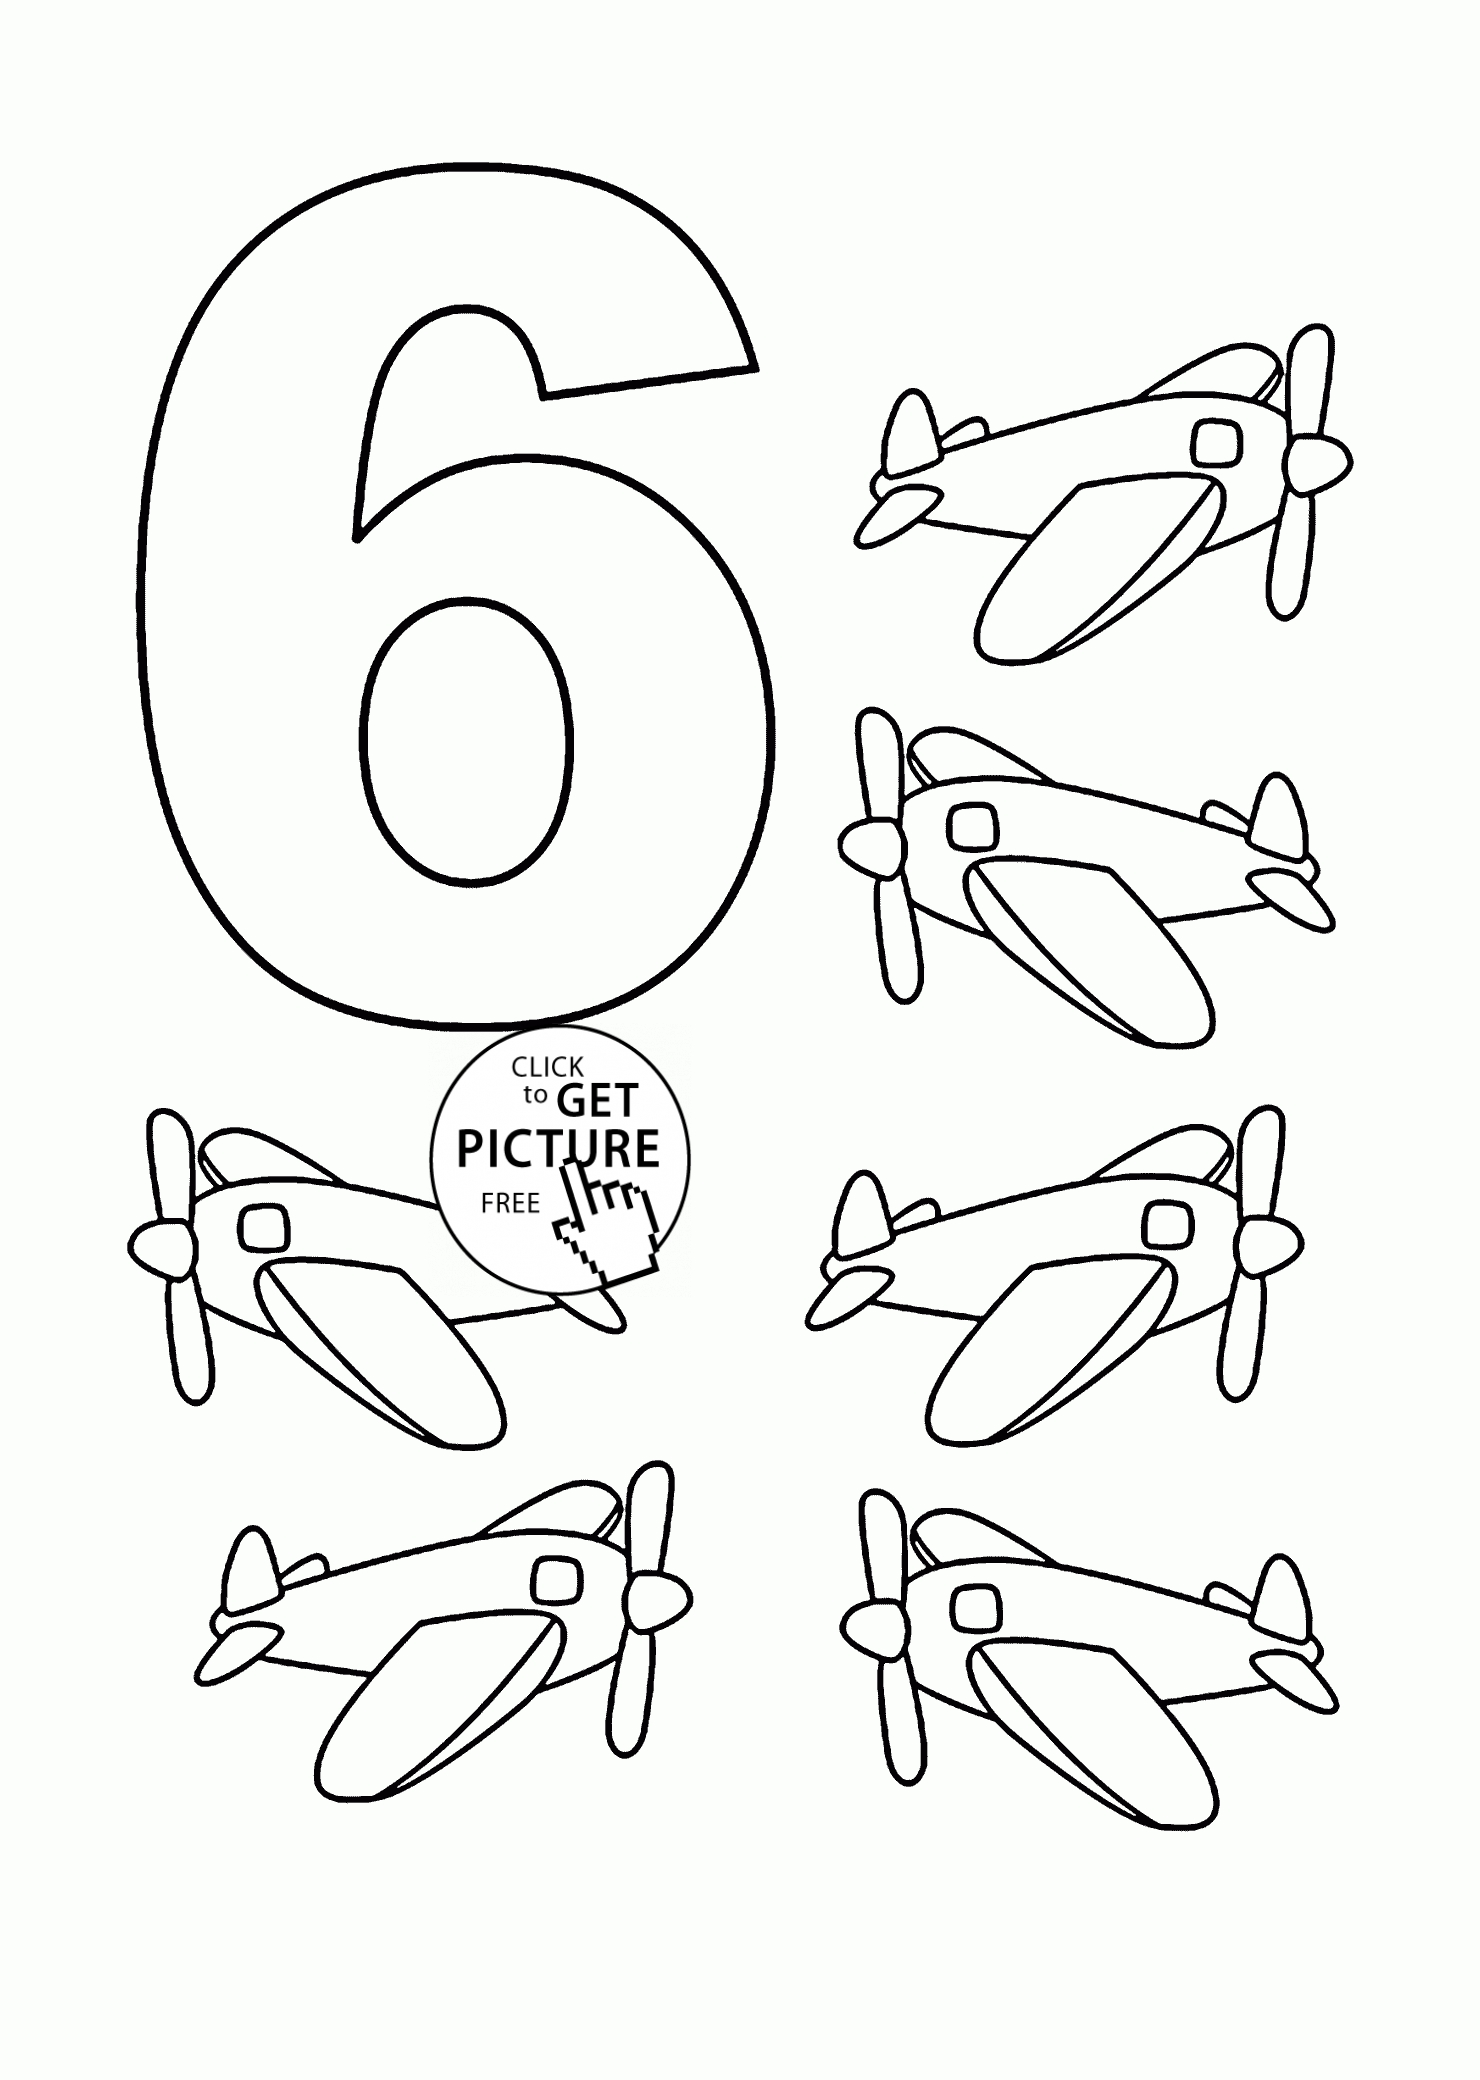 19-coloring-pages-by-number